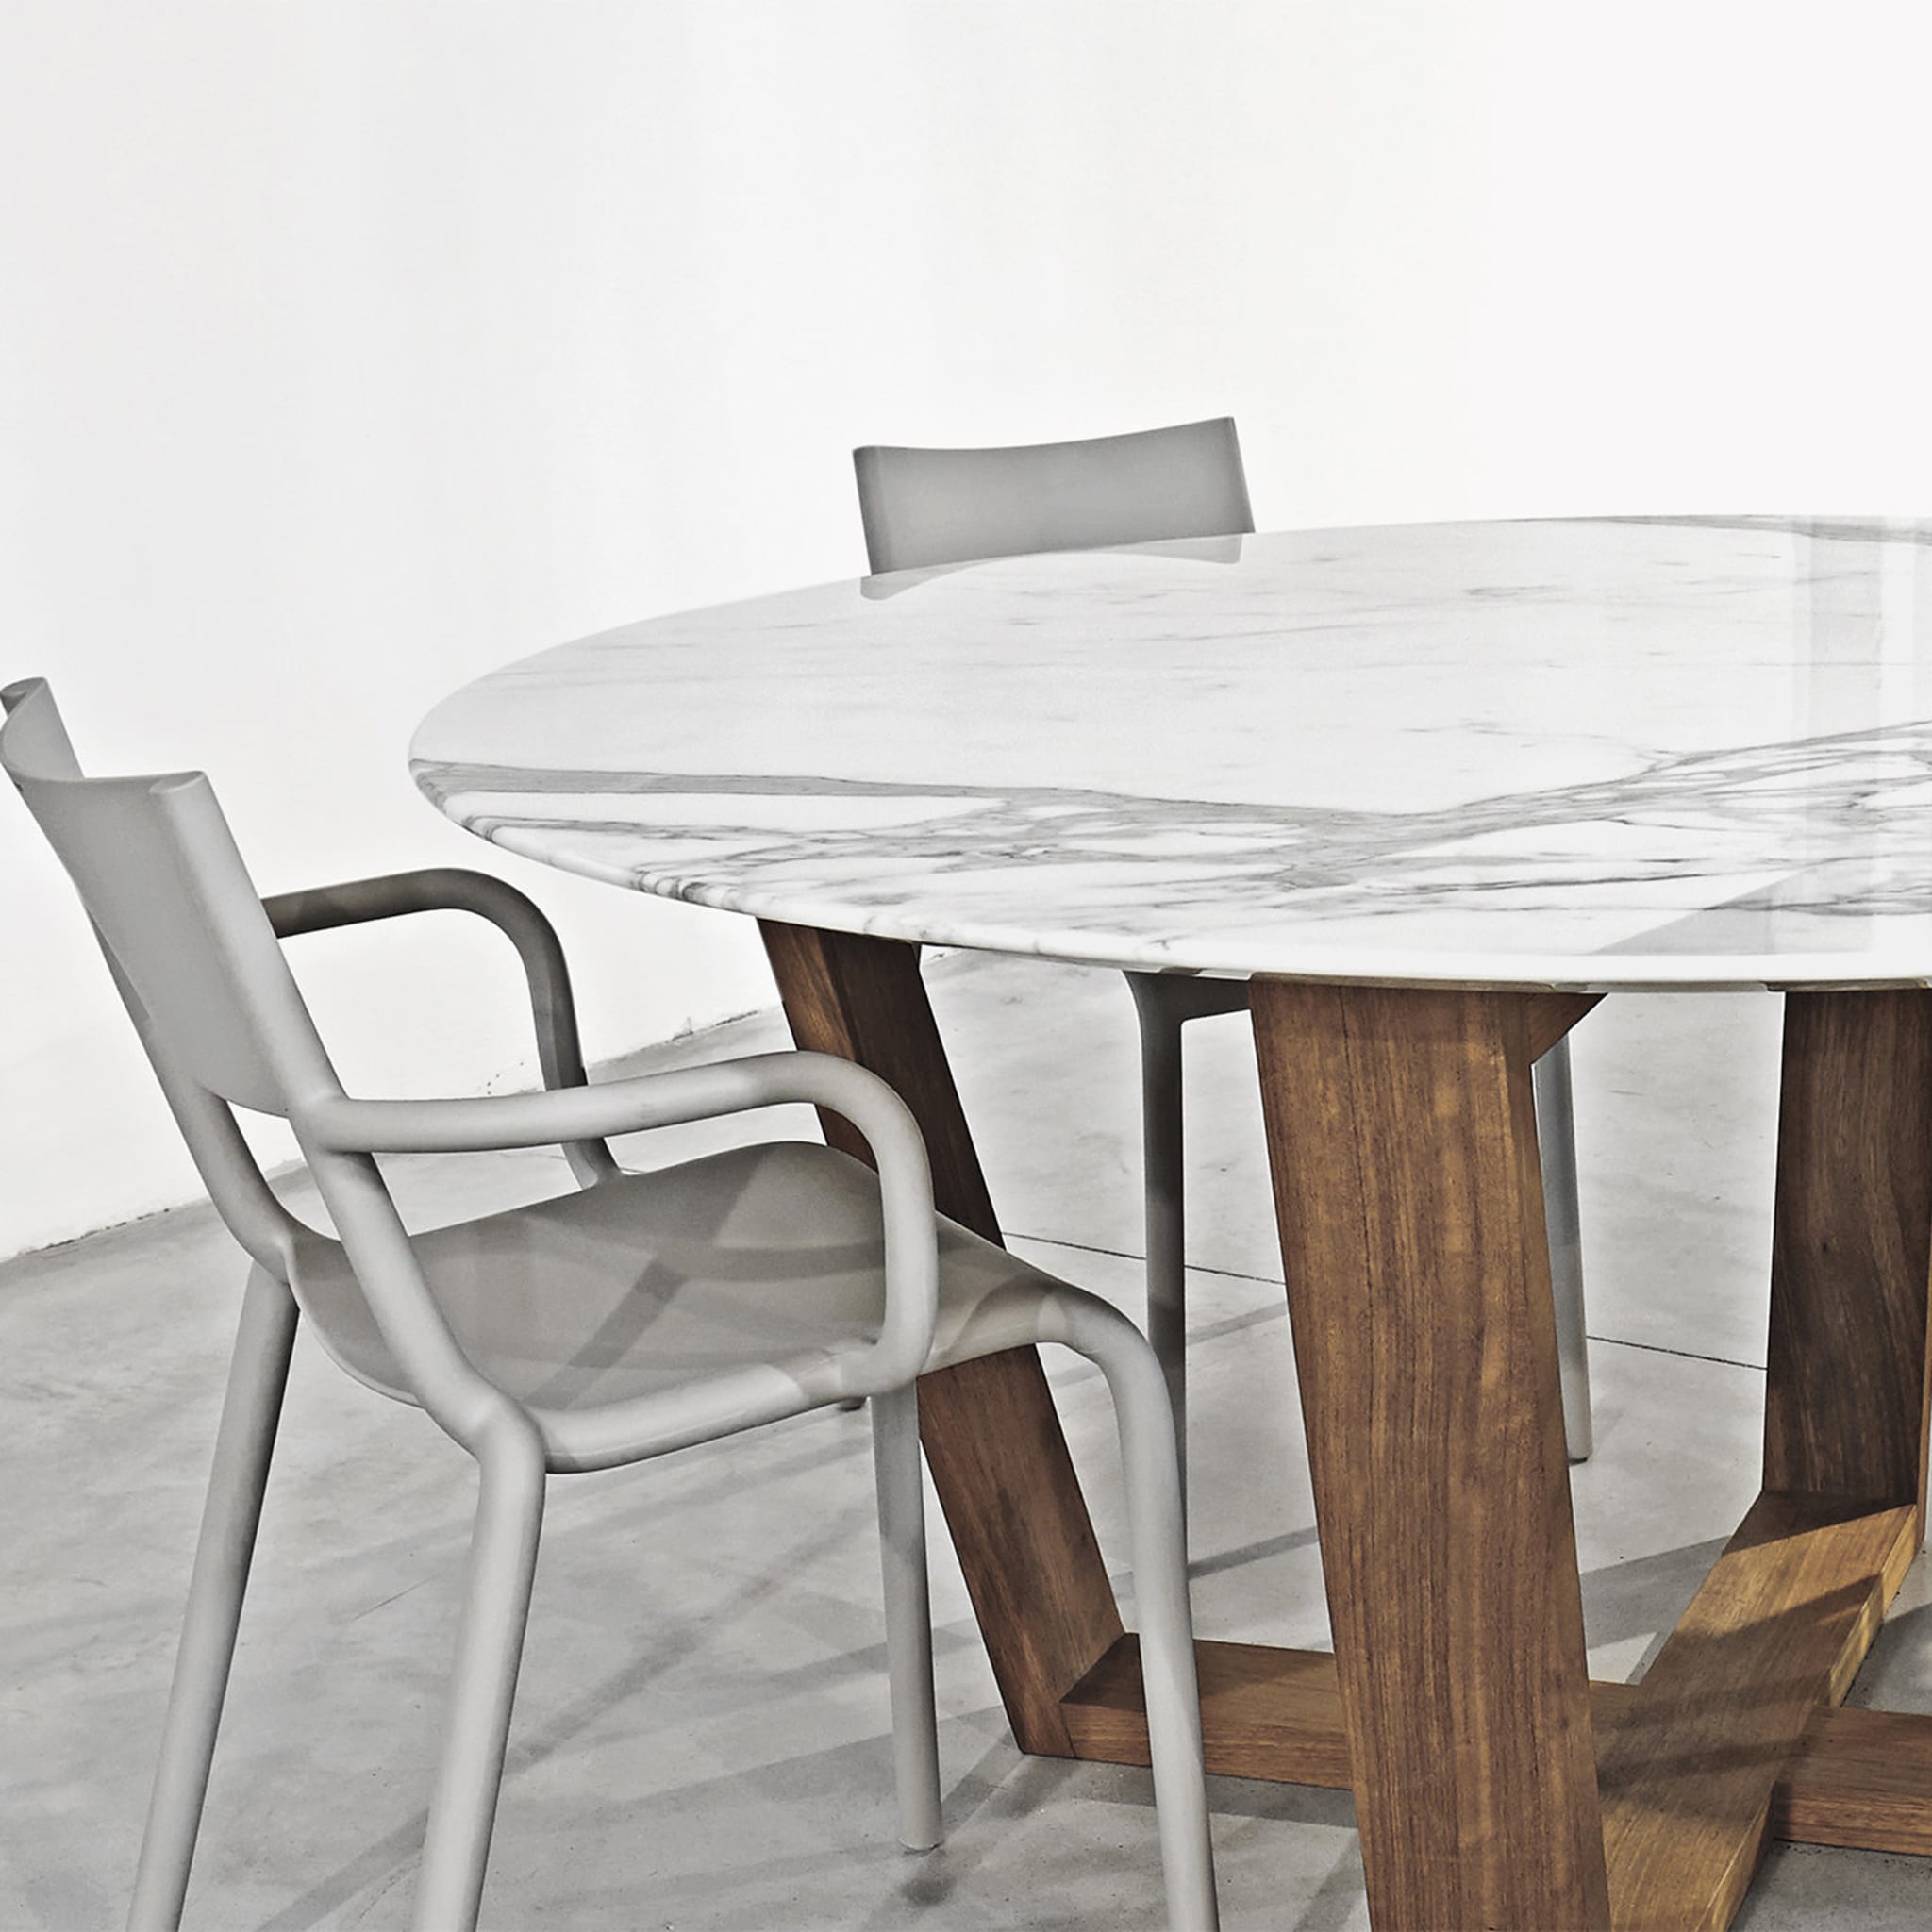 Large Basket Table by Eugenio Biselli - Alternative view 3